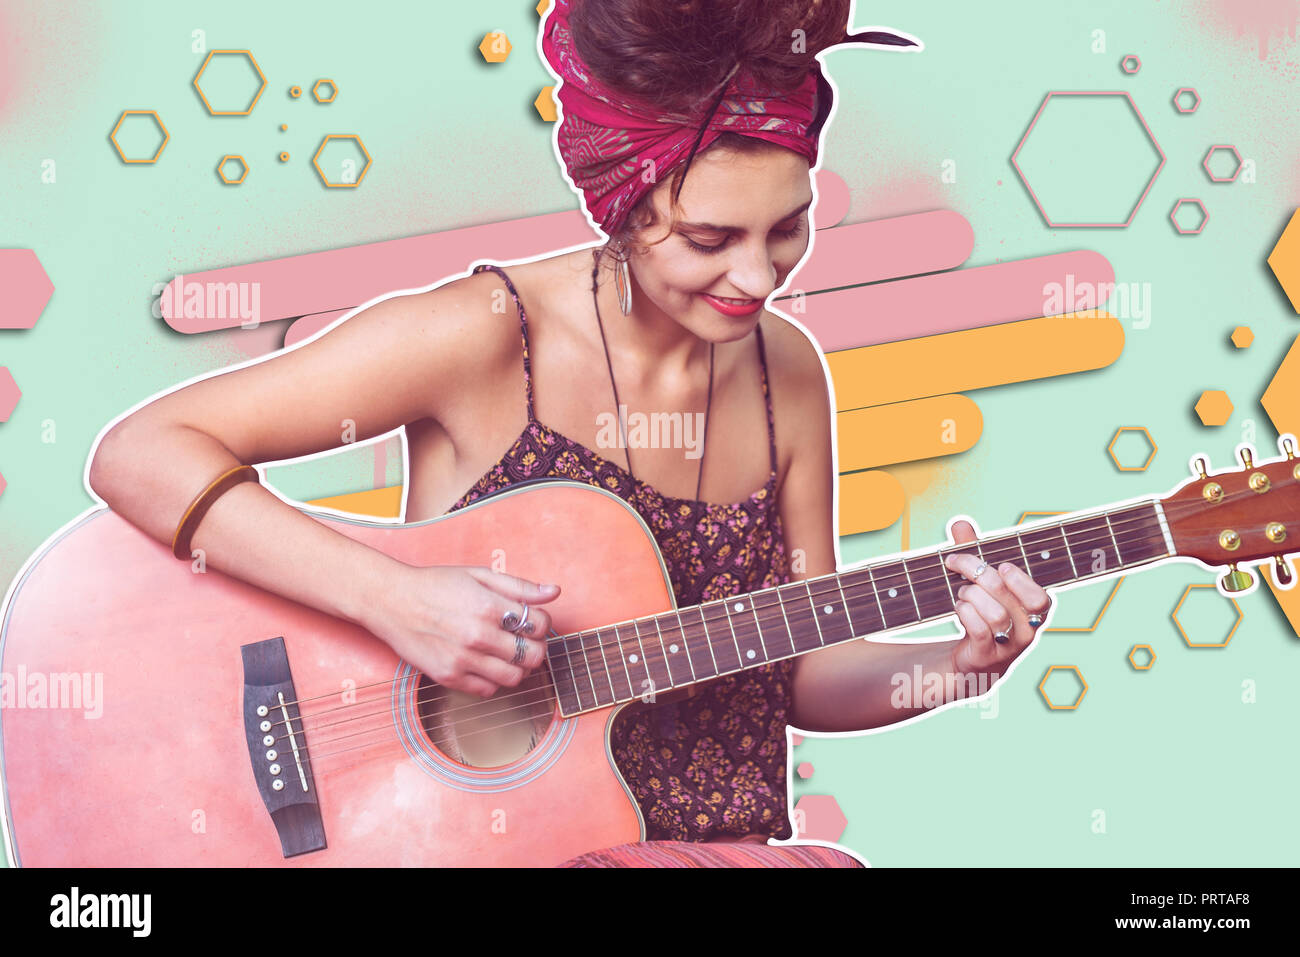 Wonderful talanted young lady playing a guitar Stock Photo